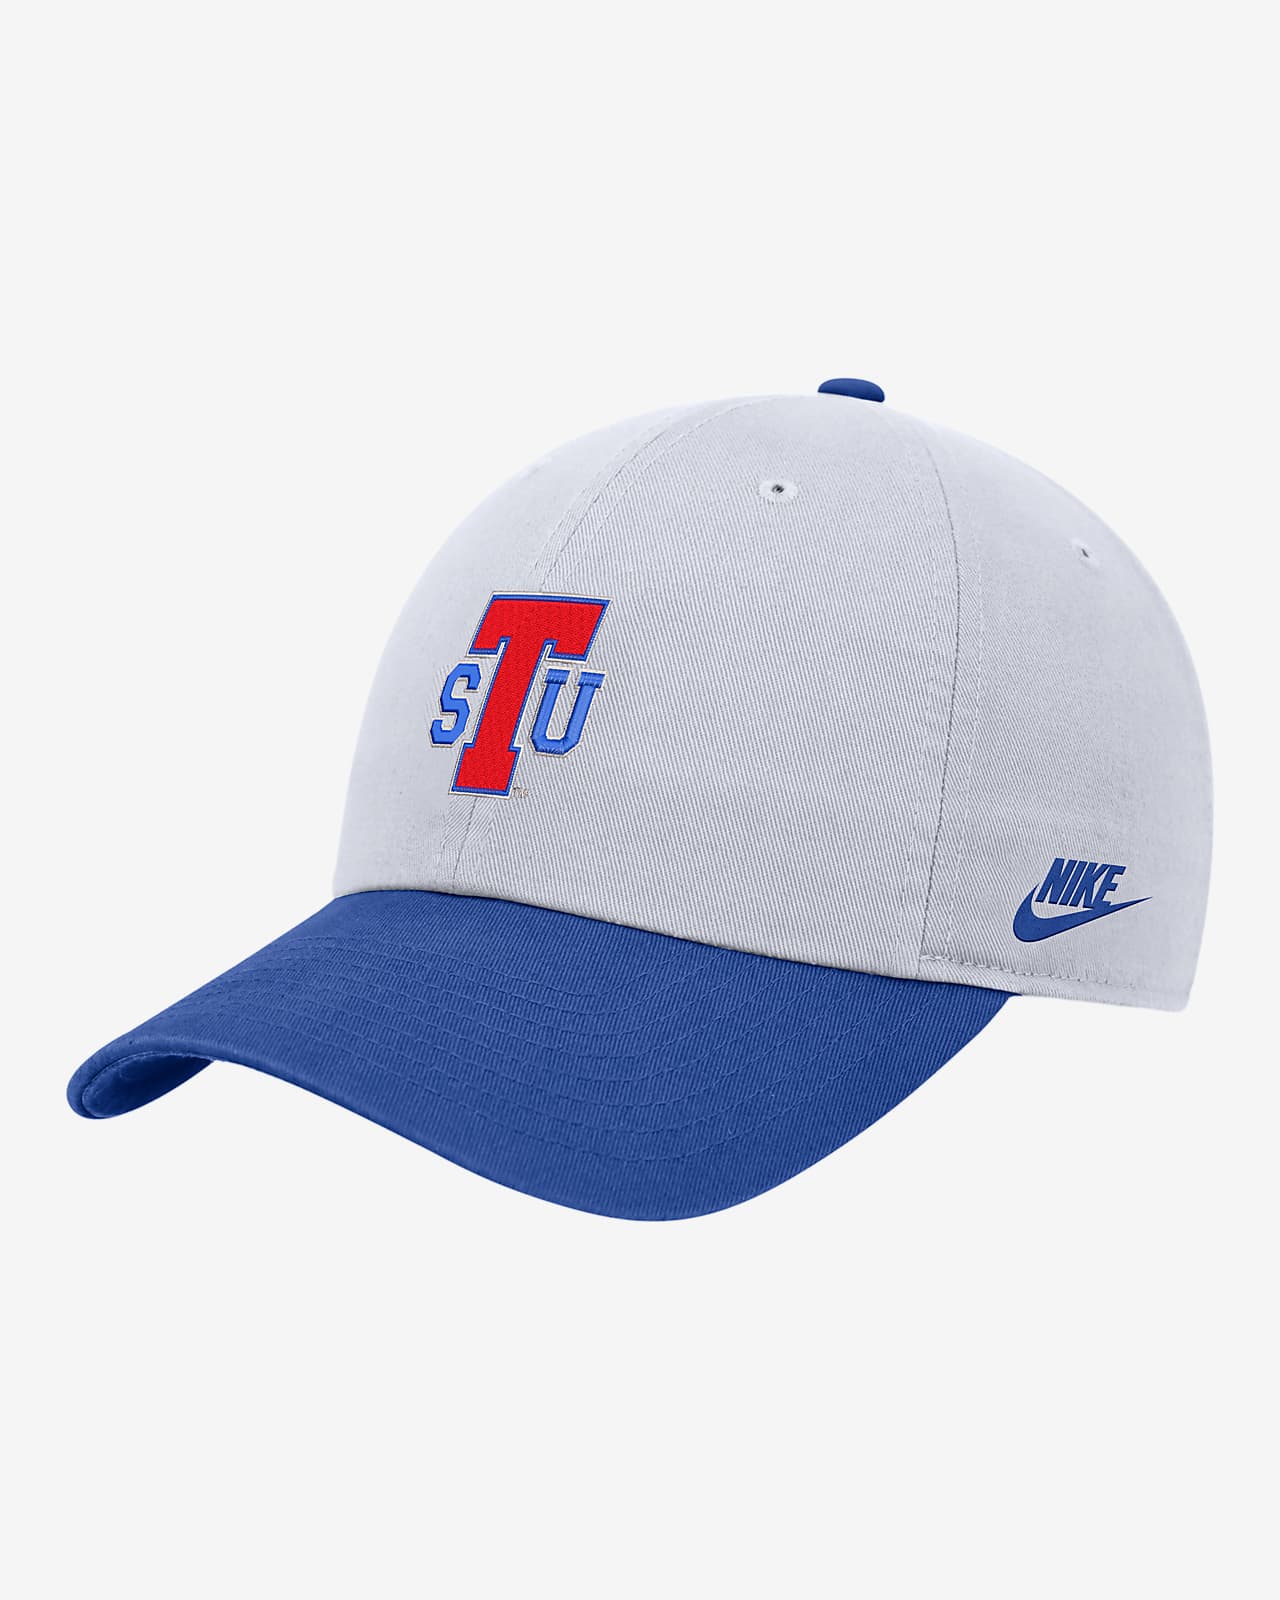 Tennessee State Nike College Adjustable Cap